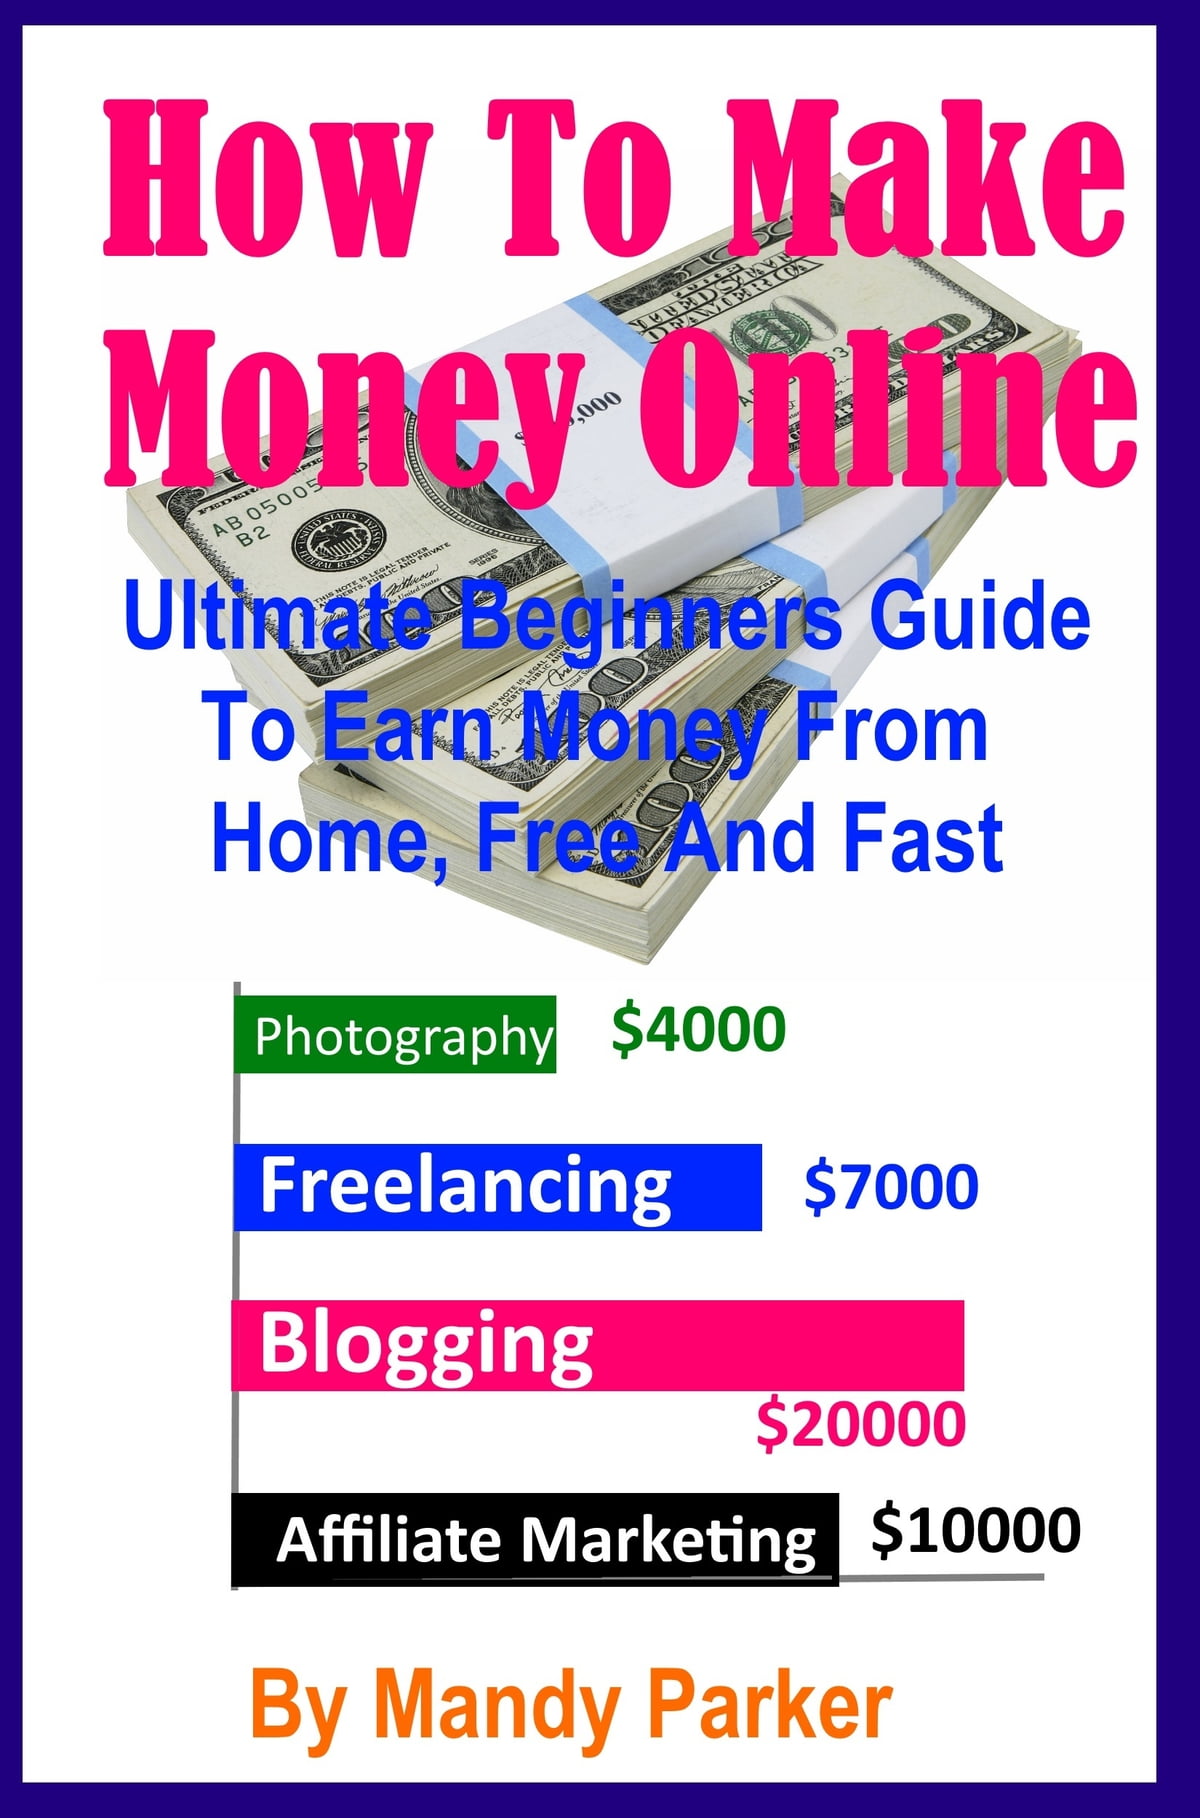 How Can I Make Money Fast Online?